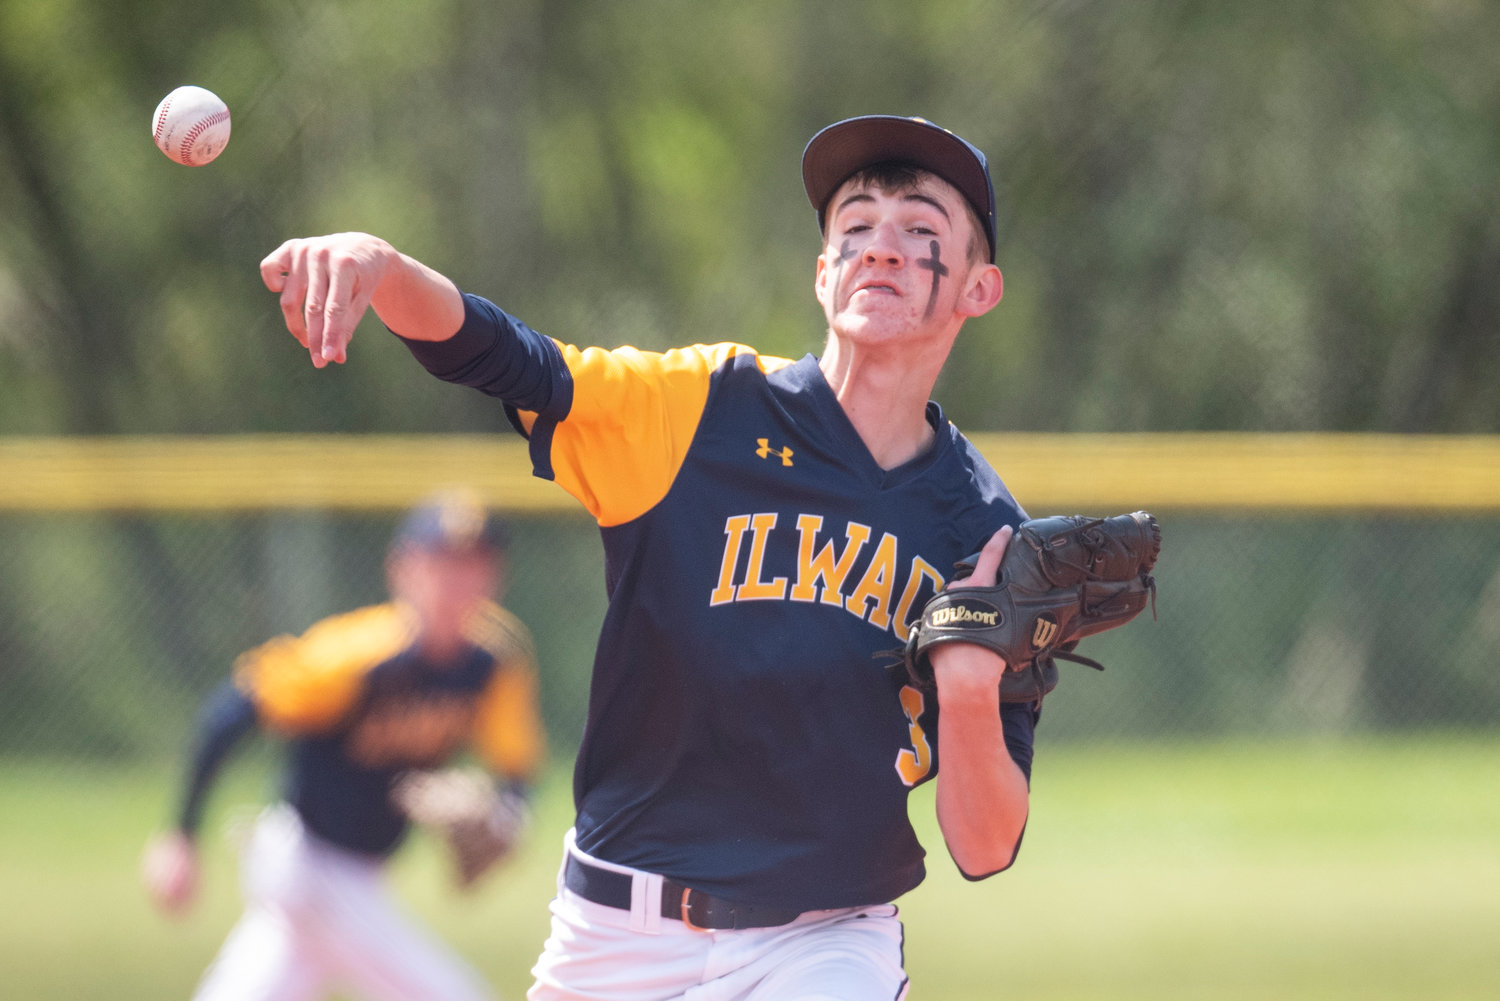 Ilwaco pitcher Jacob Rogers delivers a pitch to a Toledo batter.